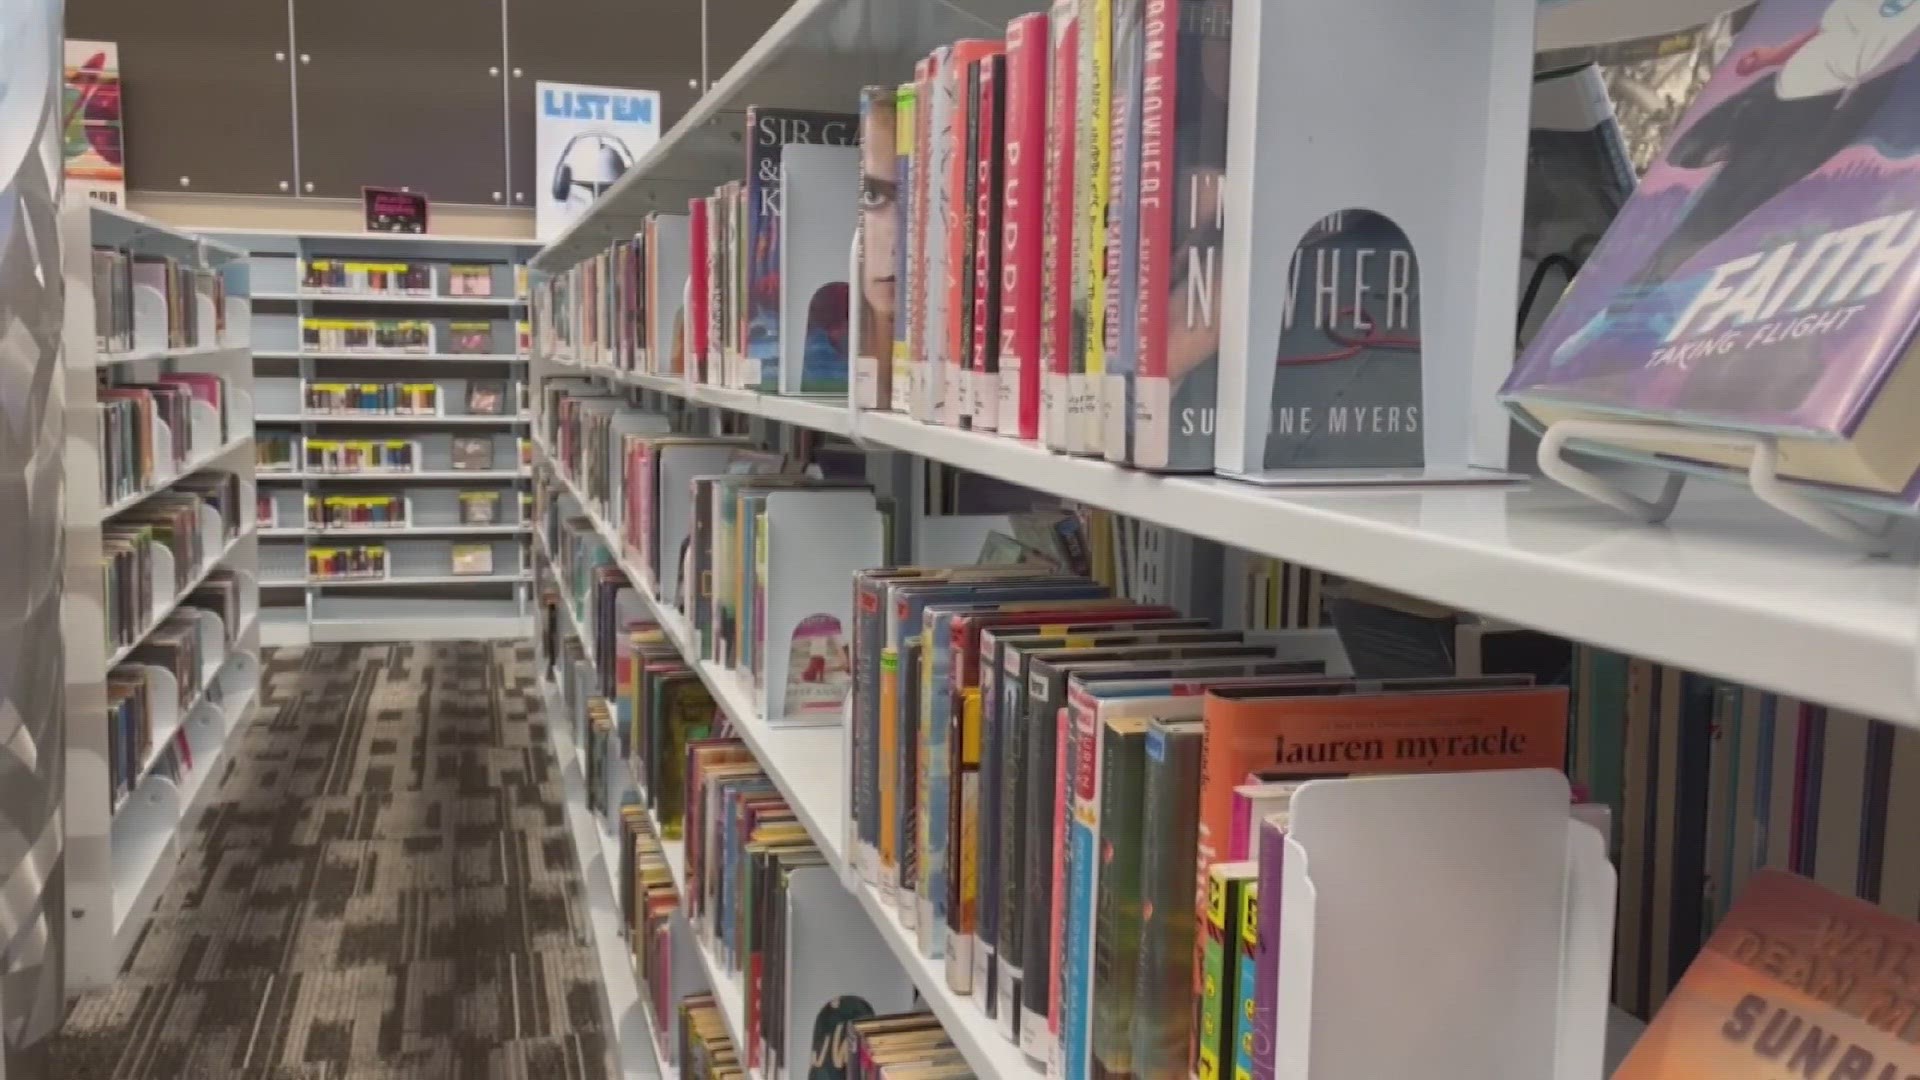 The library board recently revamped its review process for books, after months of debate over what books were appropriate for children in the public libraries.